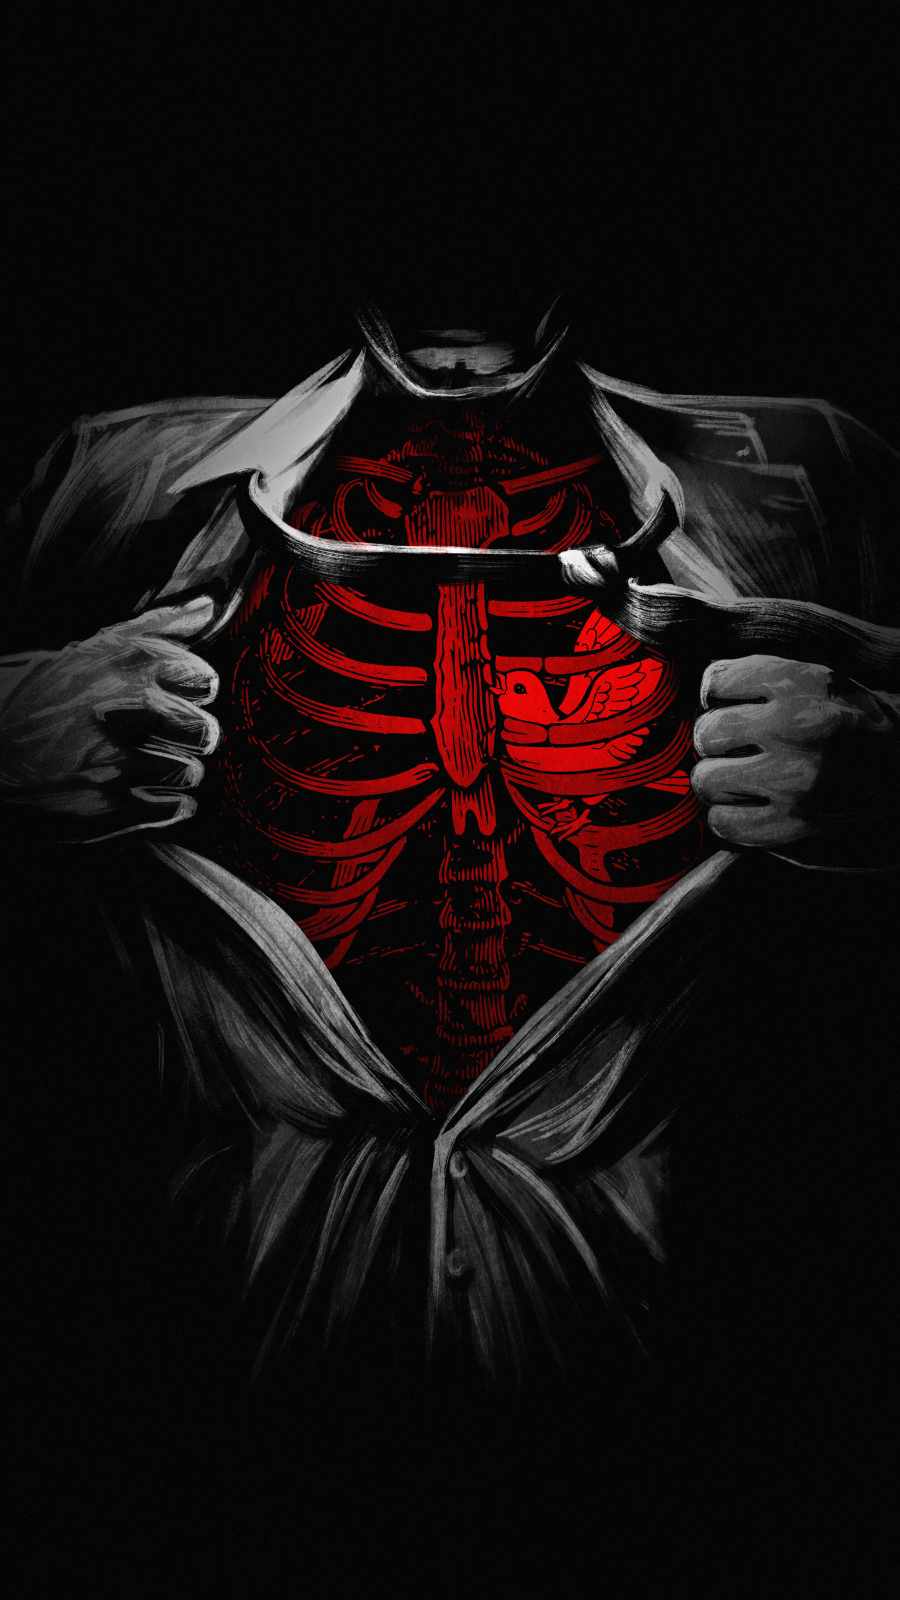 Heart Cage iPhone Wallpaper